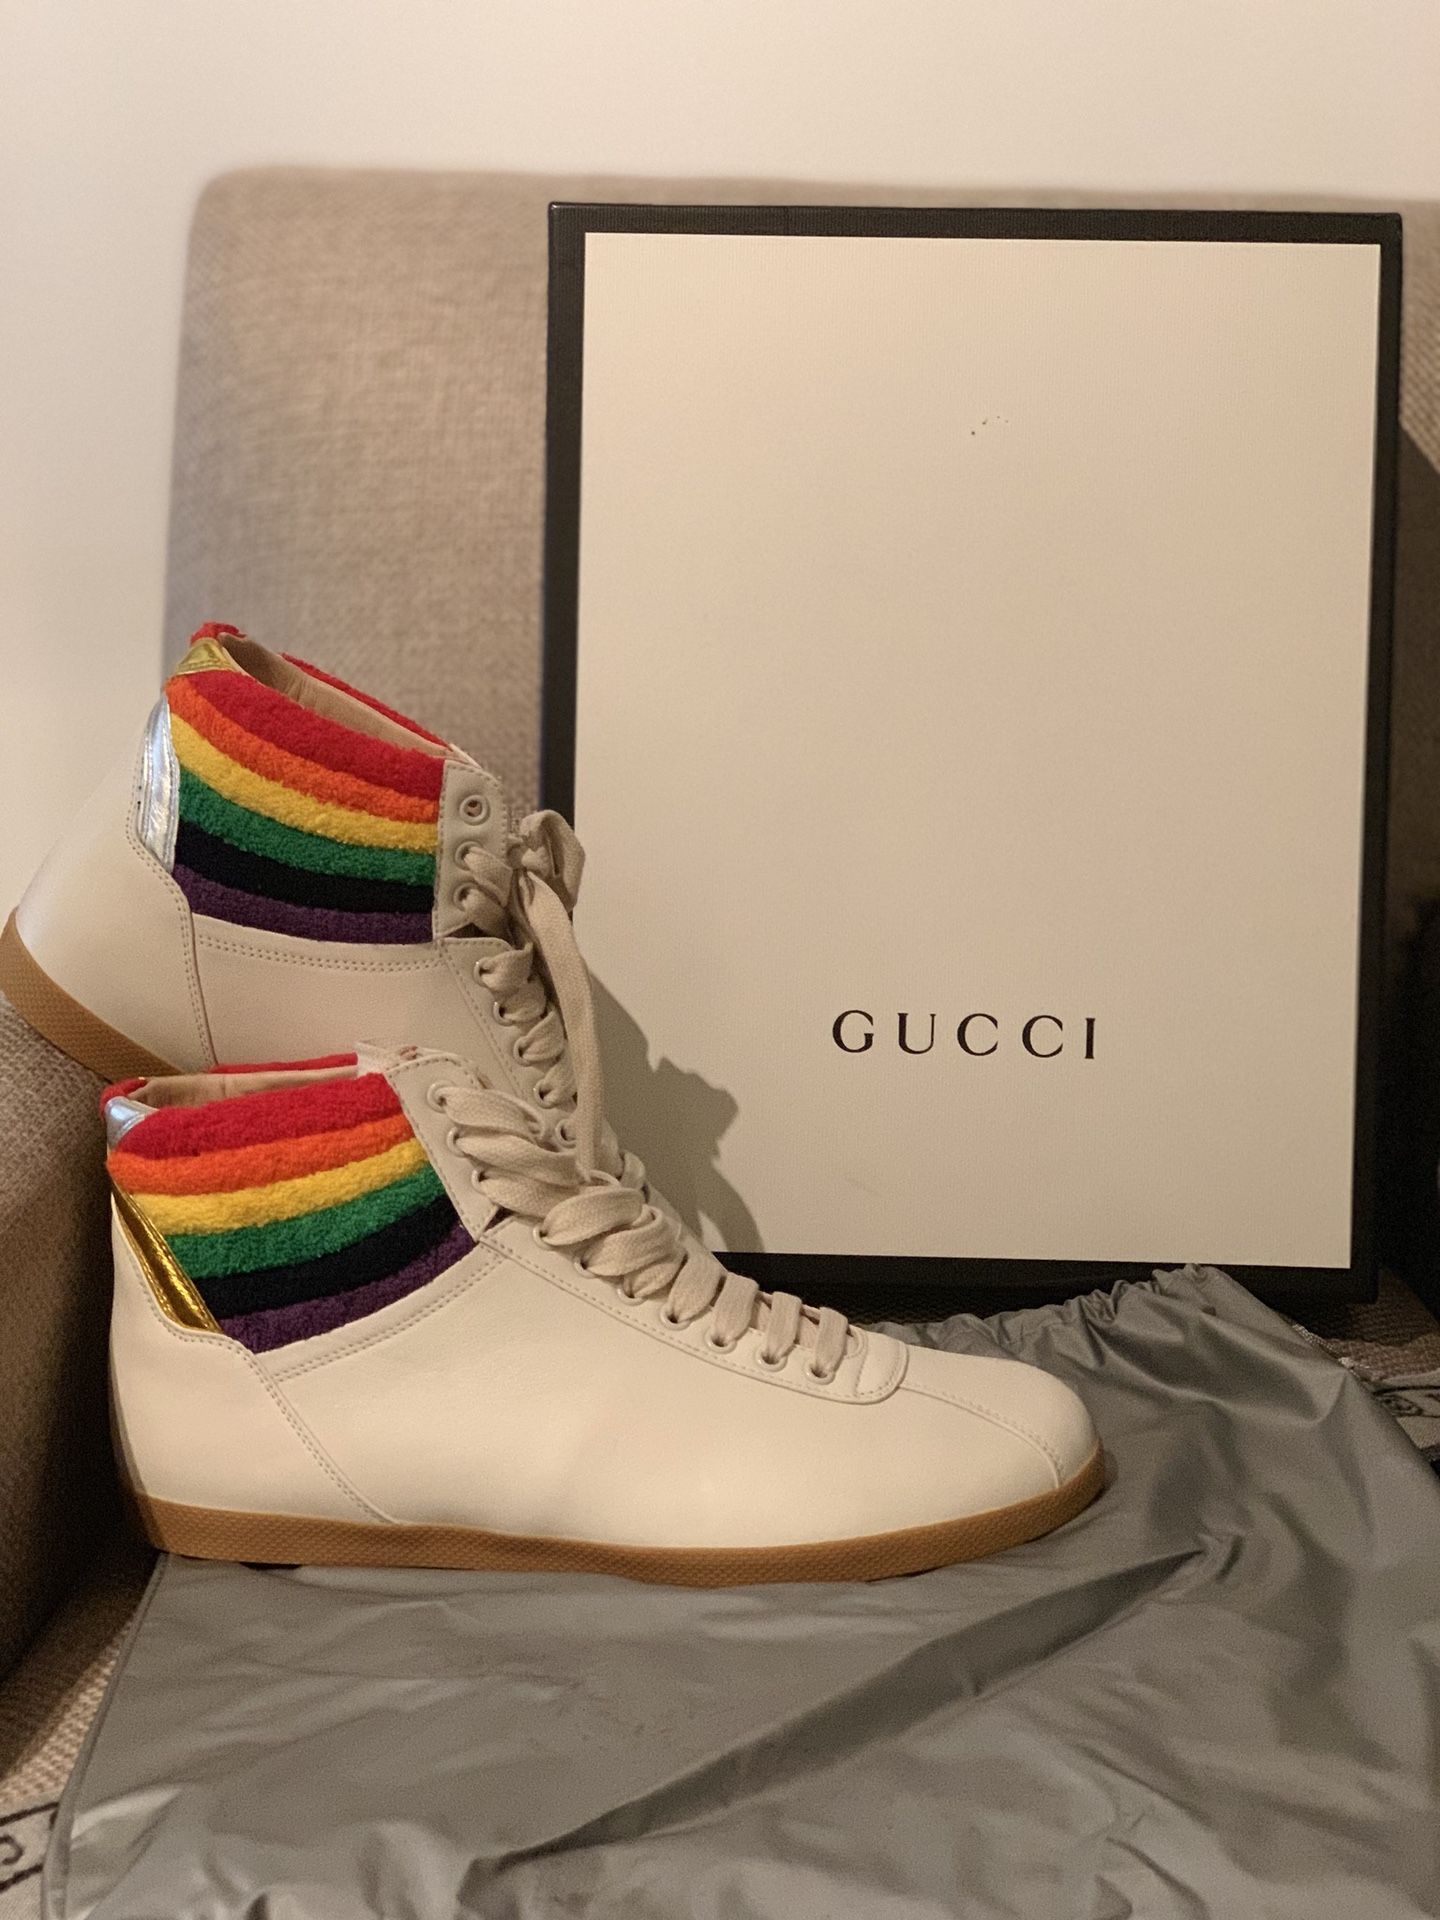 New Gucci from Saks 5 authentic never wear ! pick up only at 14 st & p